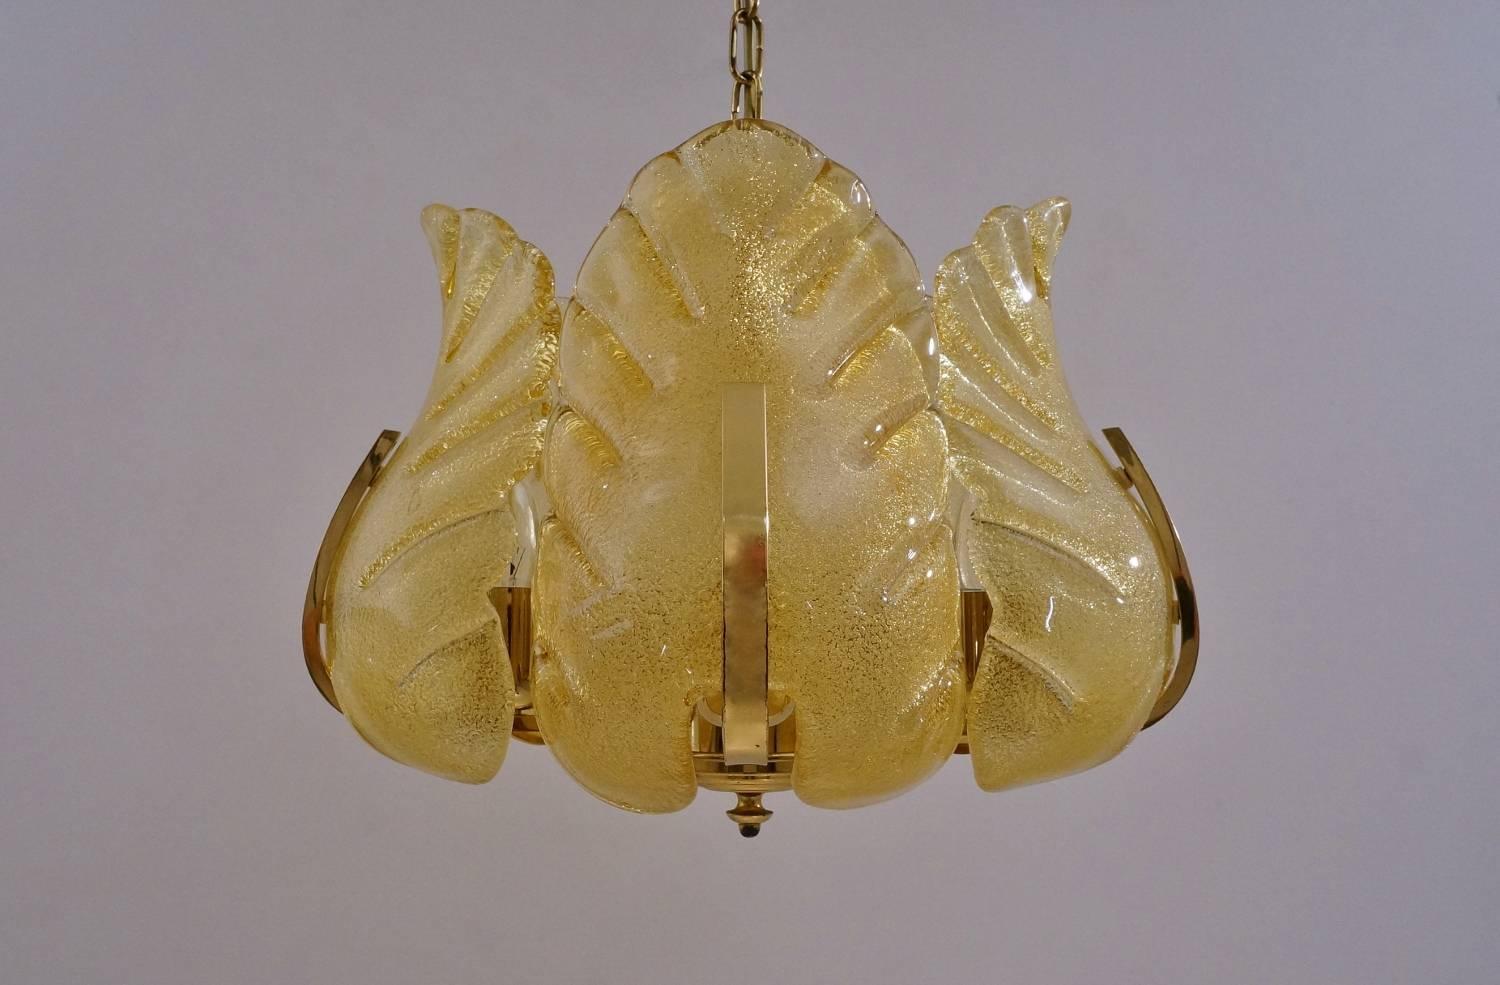 Carl Fagerlund Orrefors chandelier gold glass leaves on a brass frame, five lights, circa 1960s, Sweden.

Thoroughly cleaned respecting the vintage patina; newly rewired, in full working order & ready to install. Light bulbs included.

This